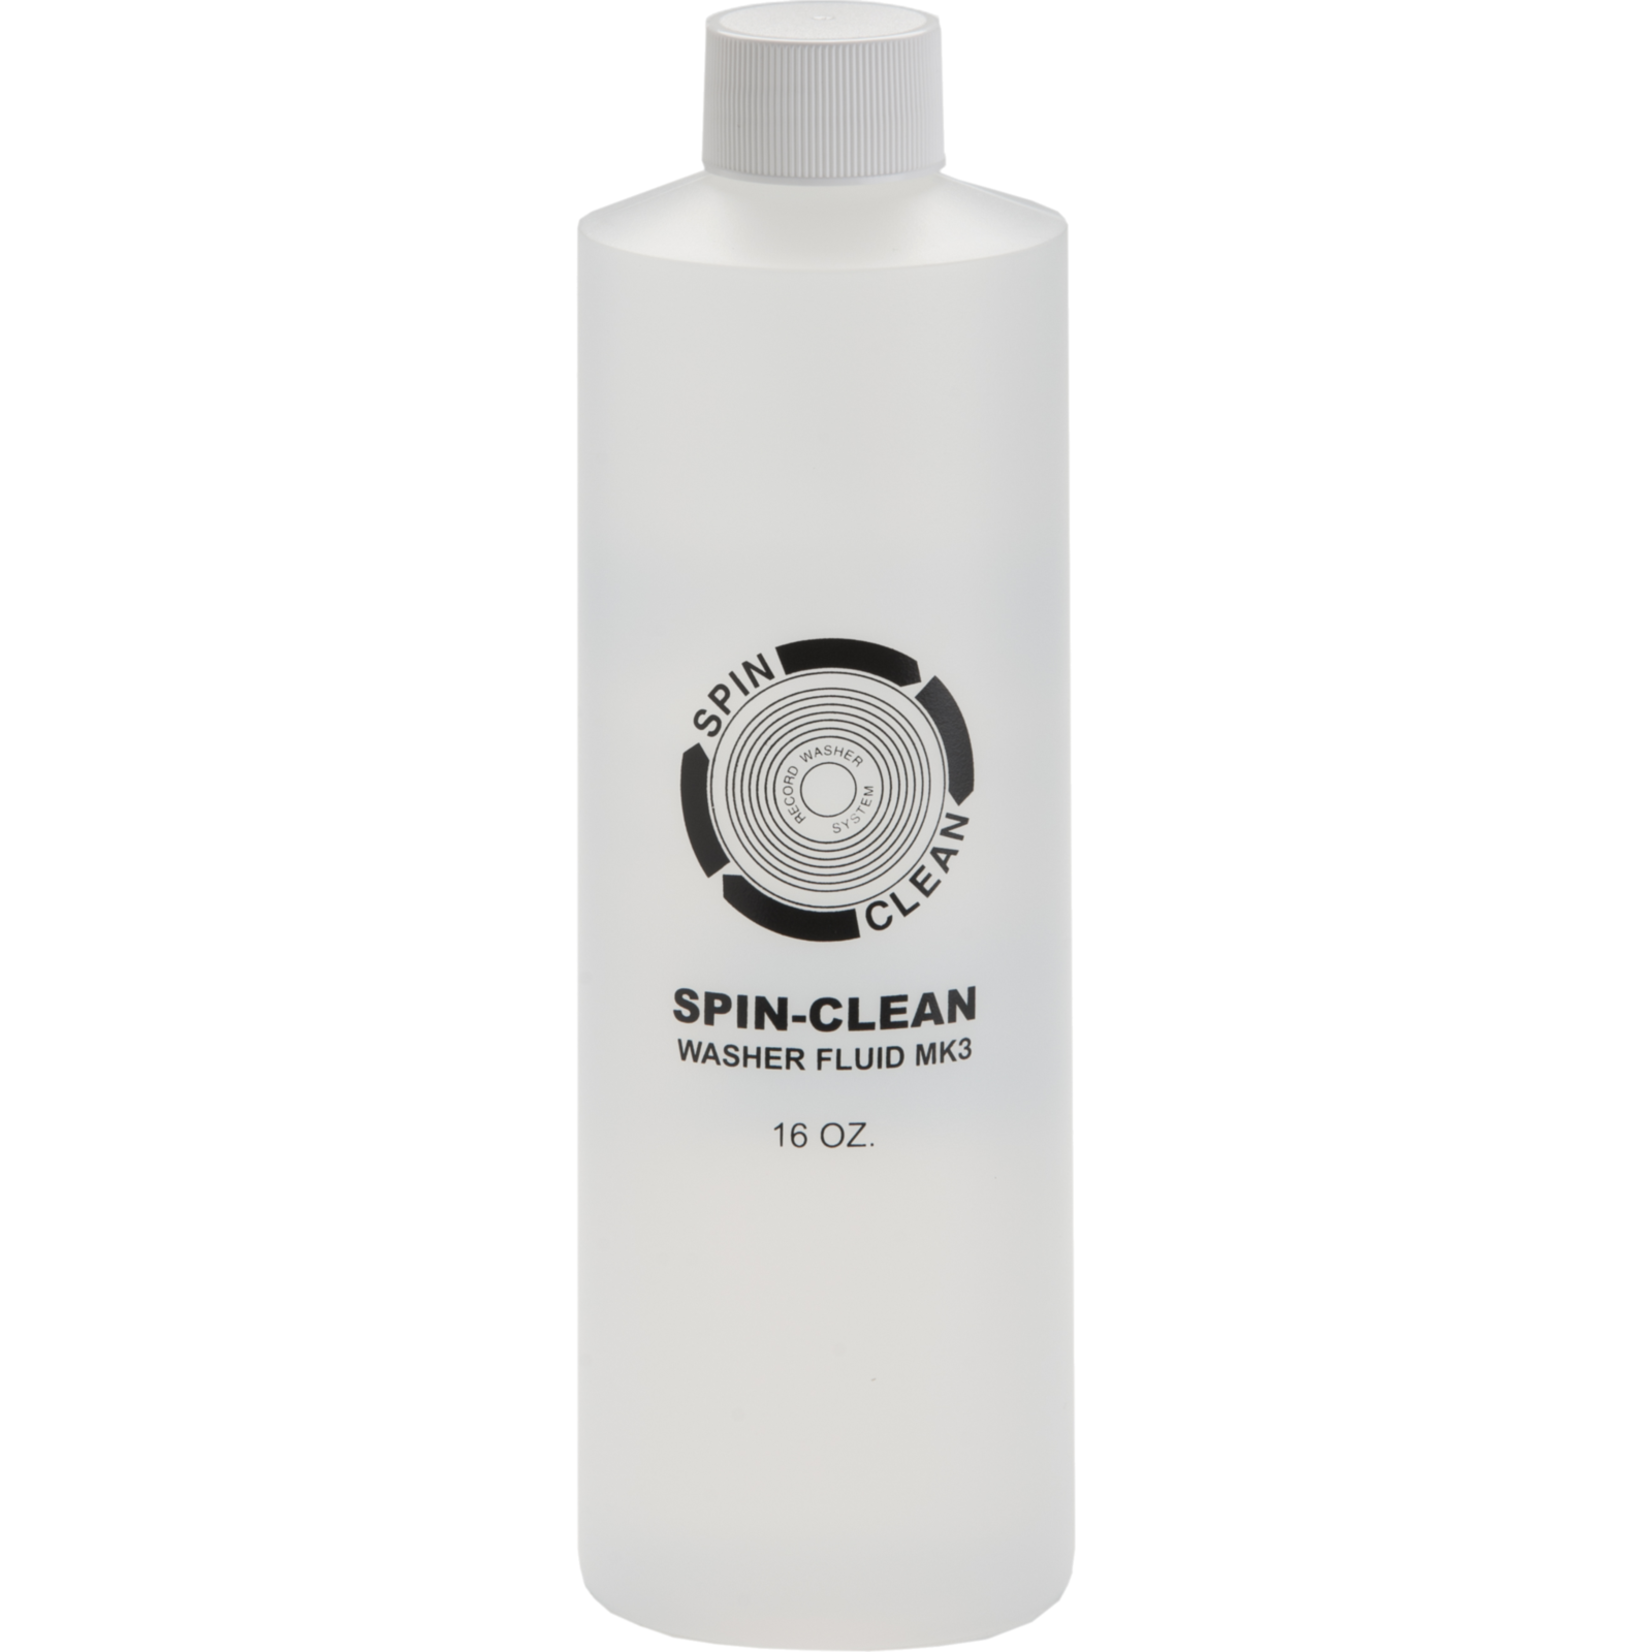 Accessory Spin-clean - Washer Fluid 16 oz.